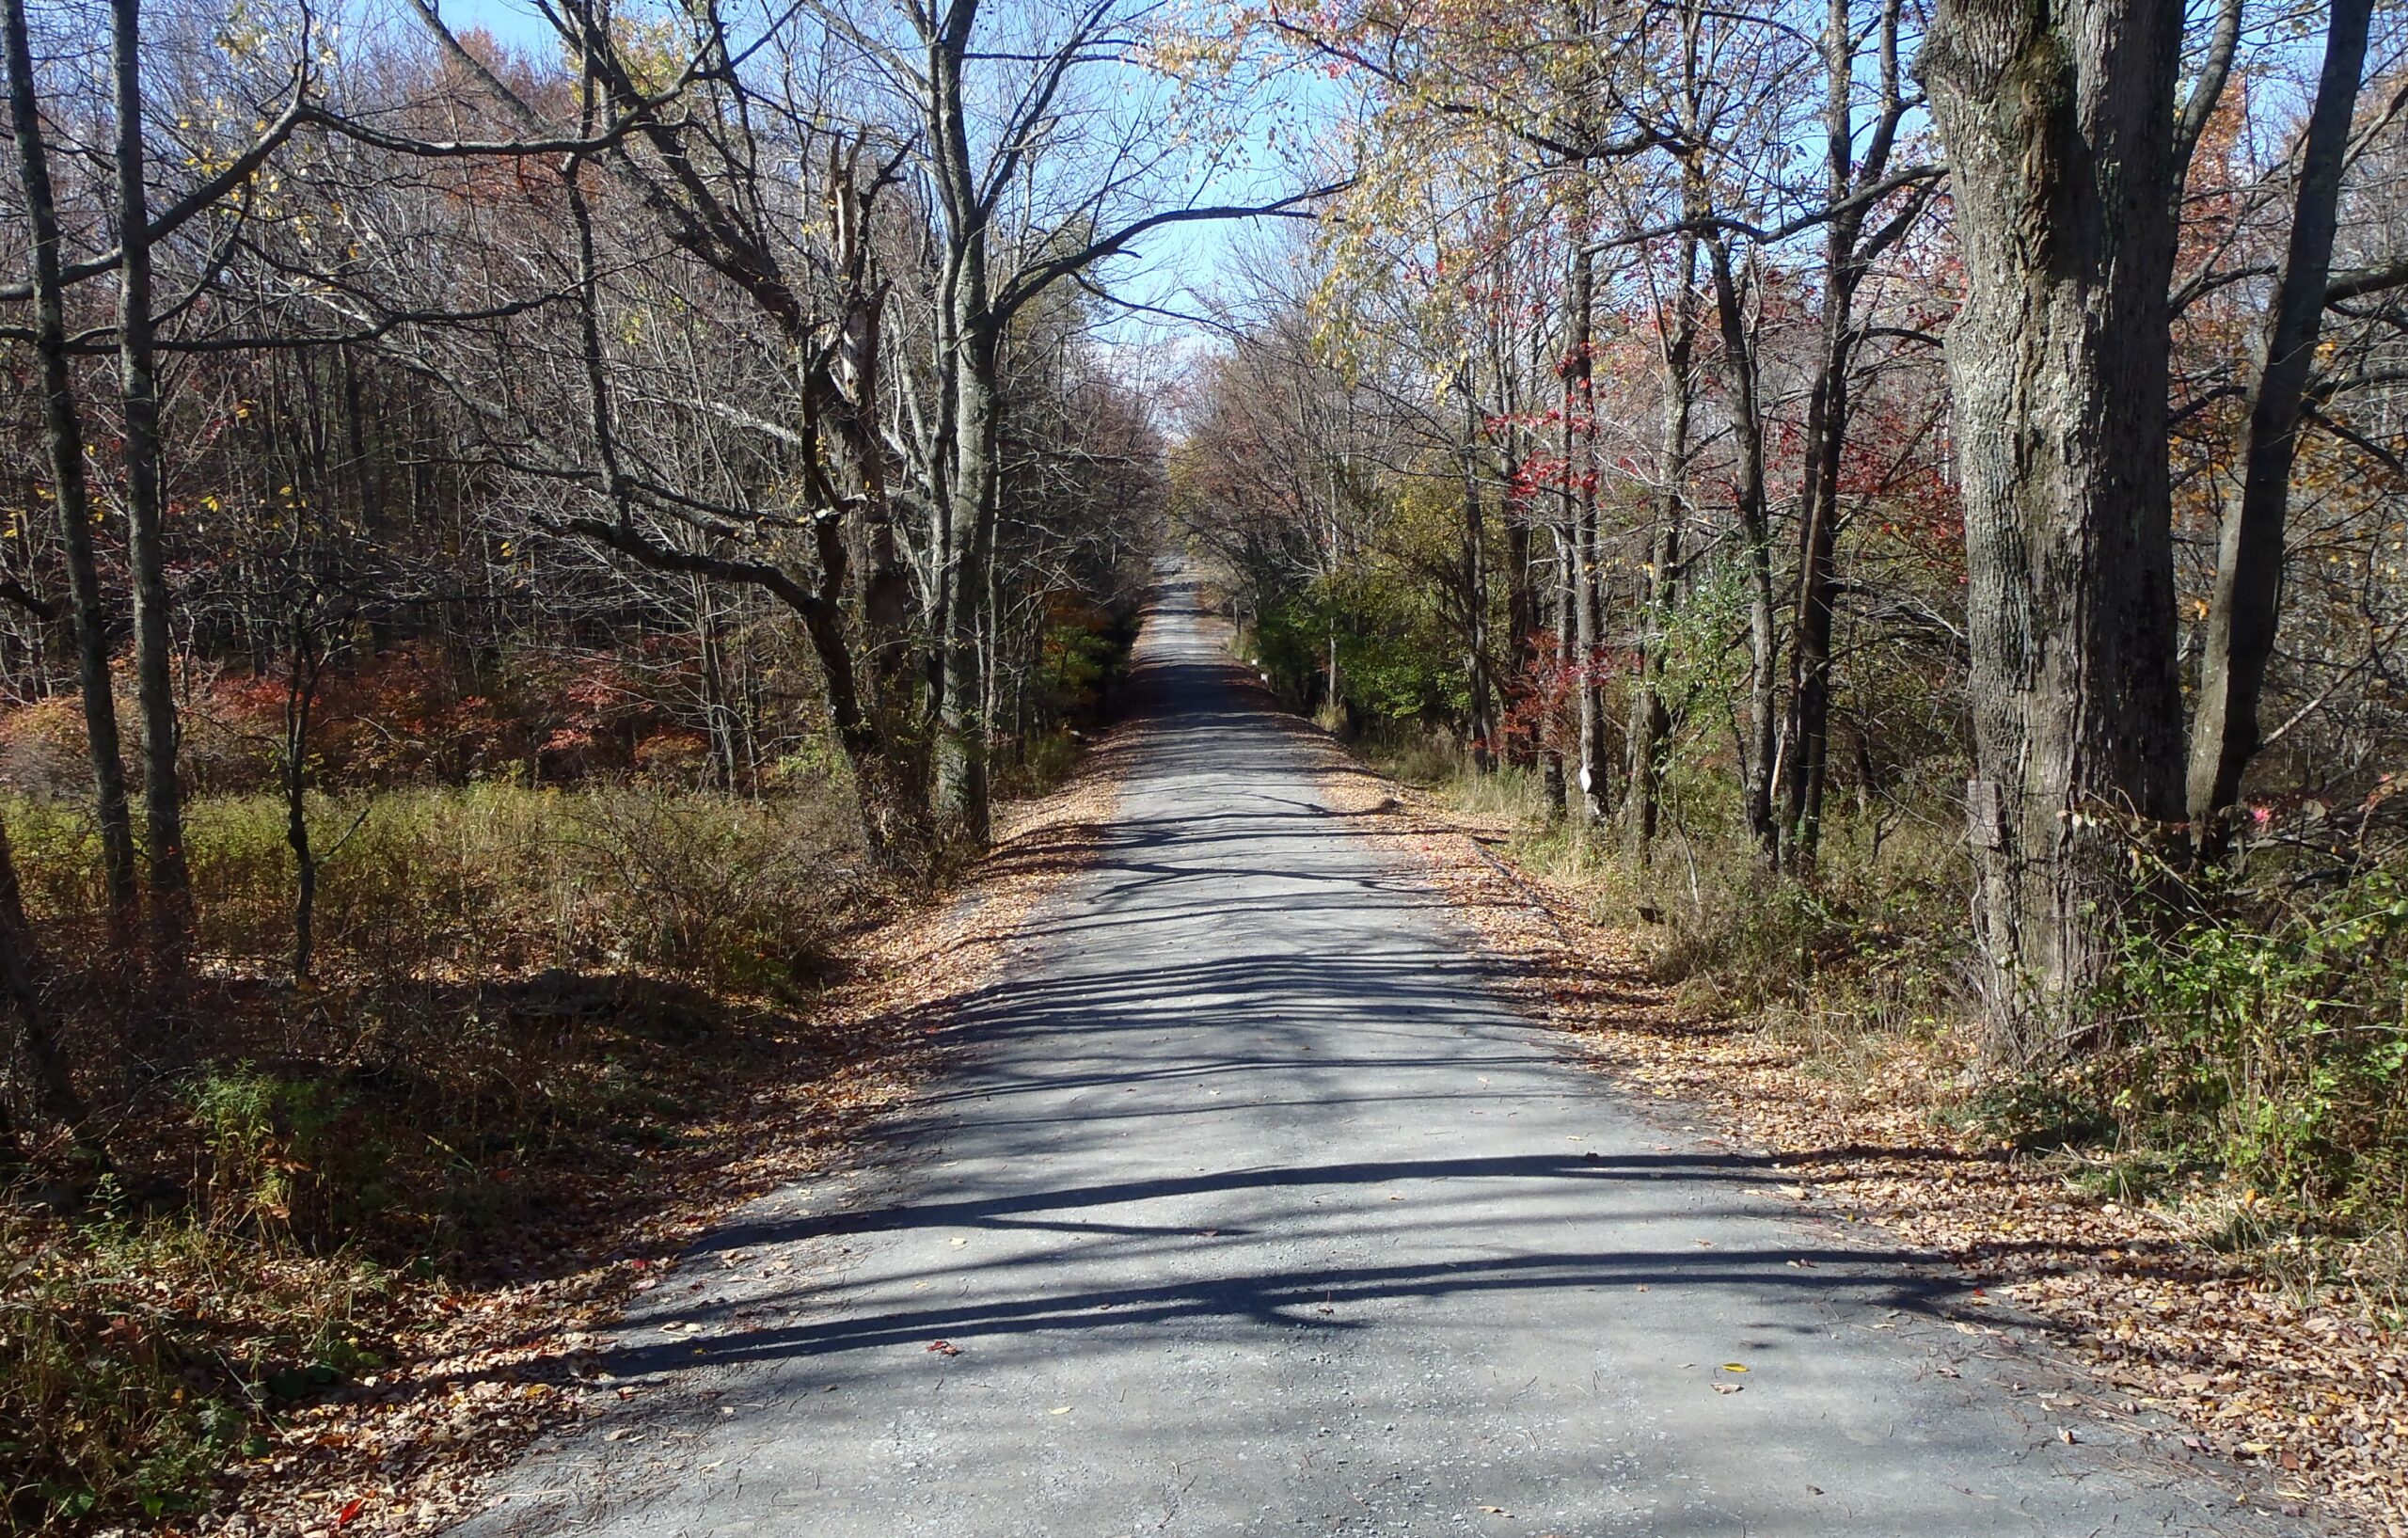 A straight and narrow road lined with trees with light fall foliage, many leaves on the ground